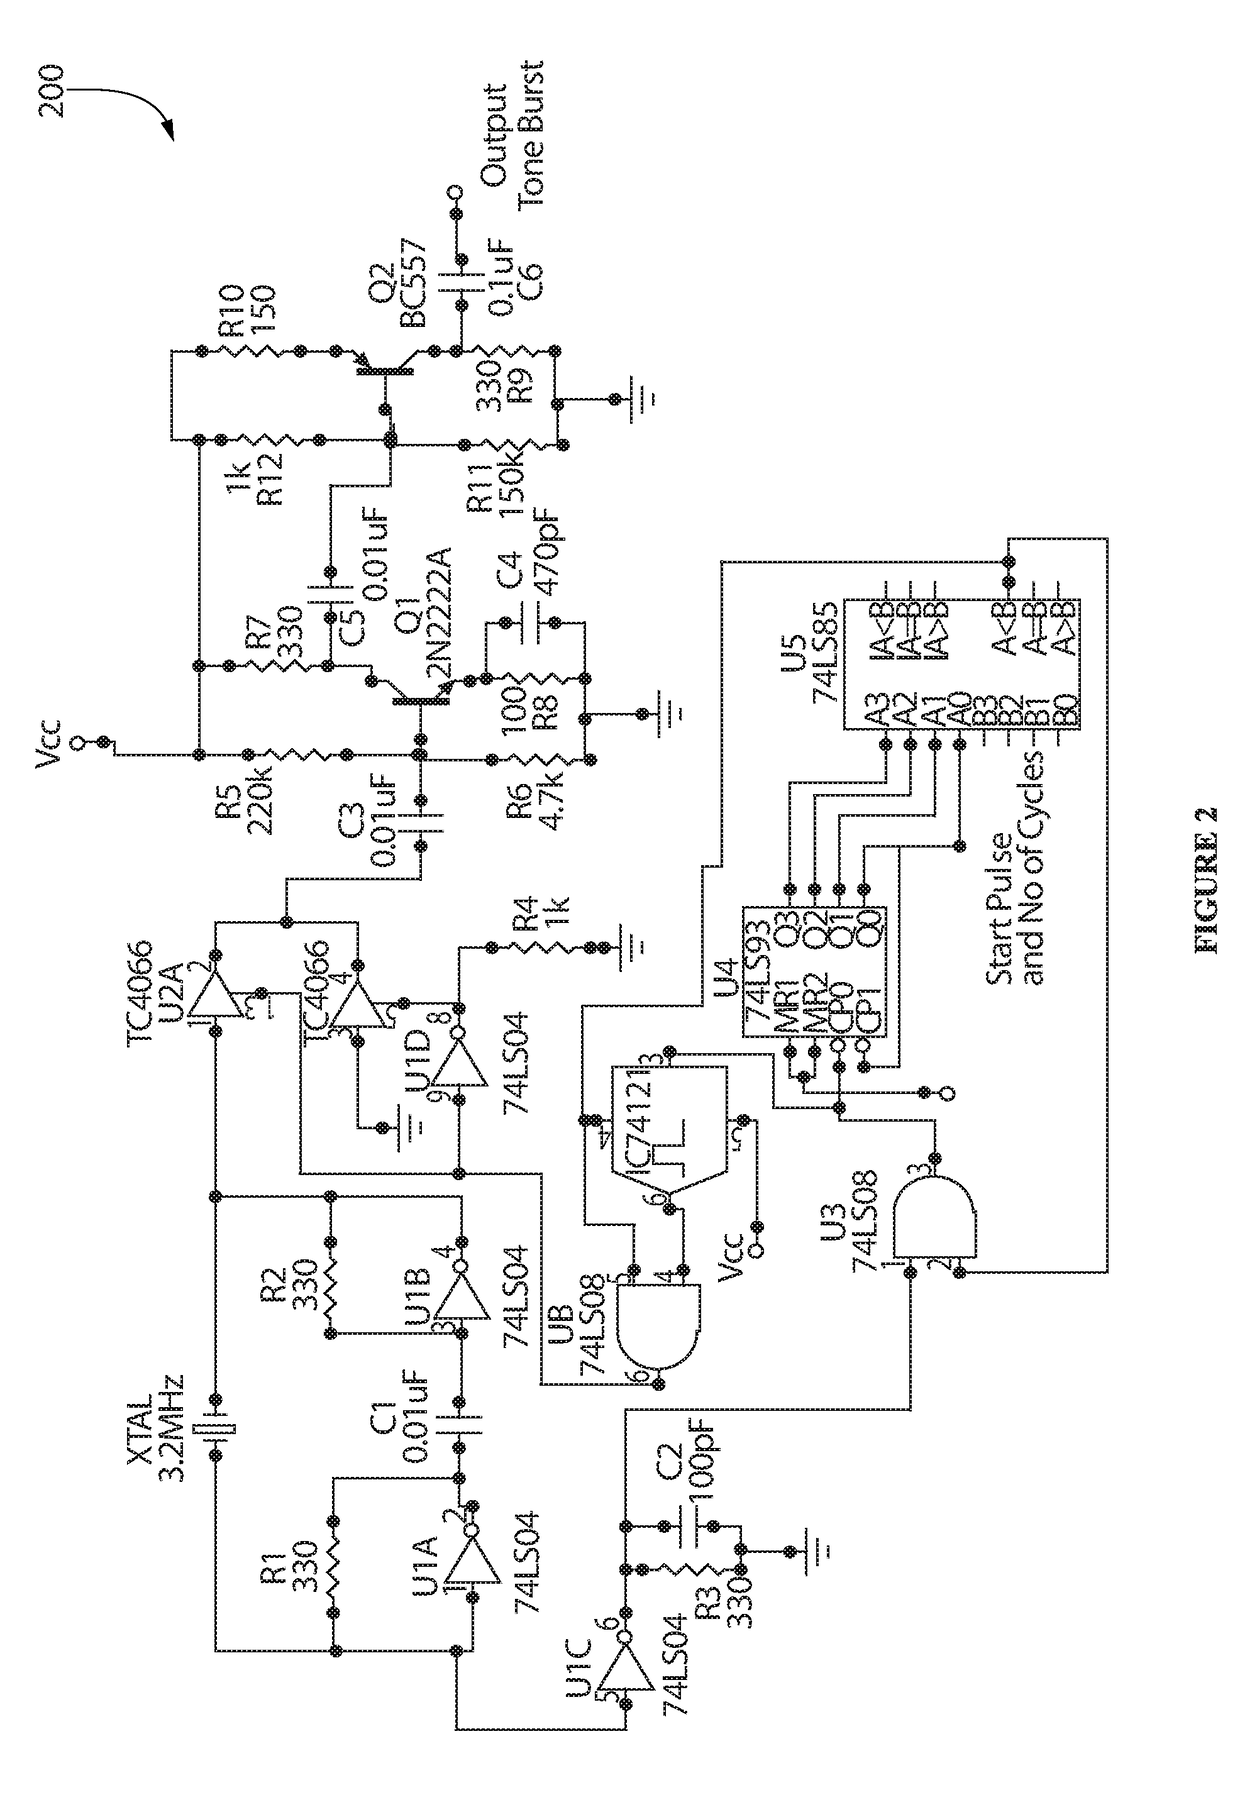 Electromagnetic acoustic transducer excitation source with programmable tone burst generator